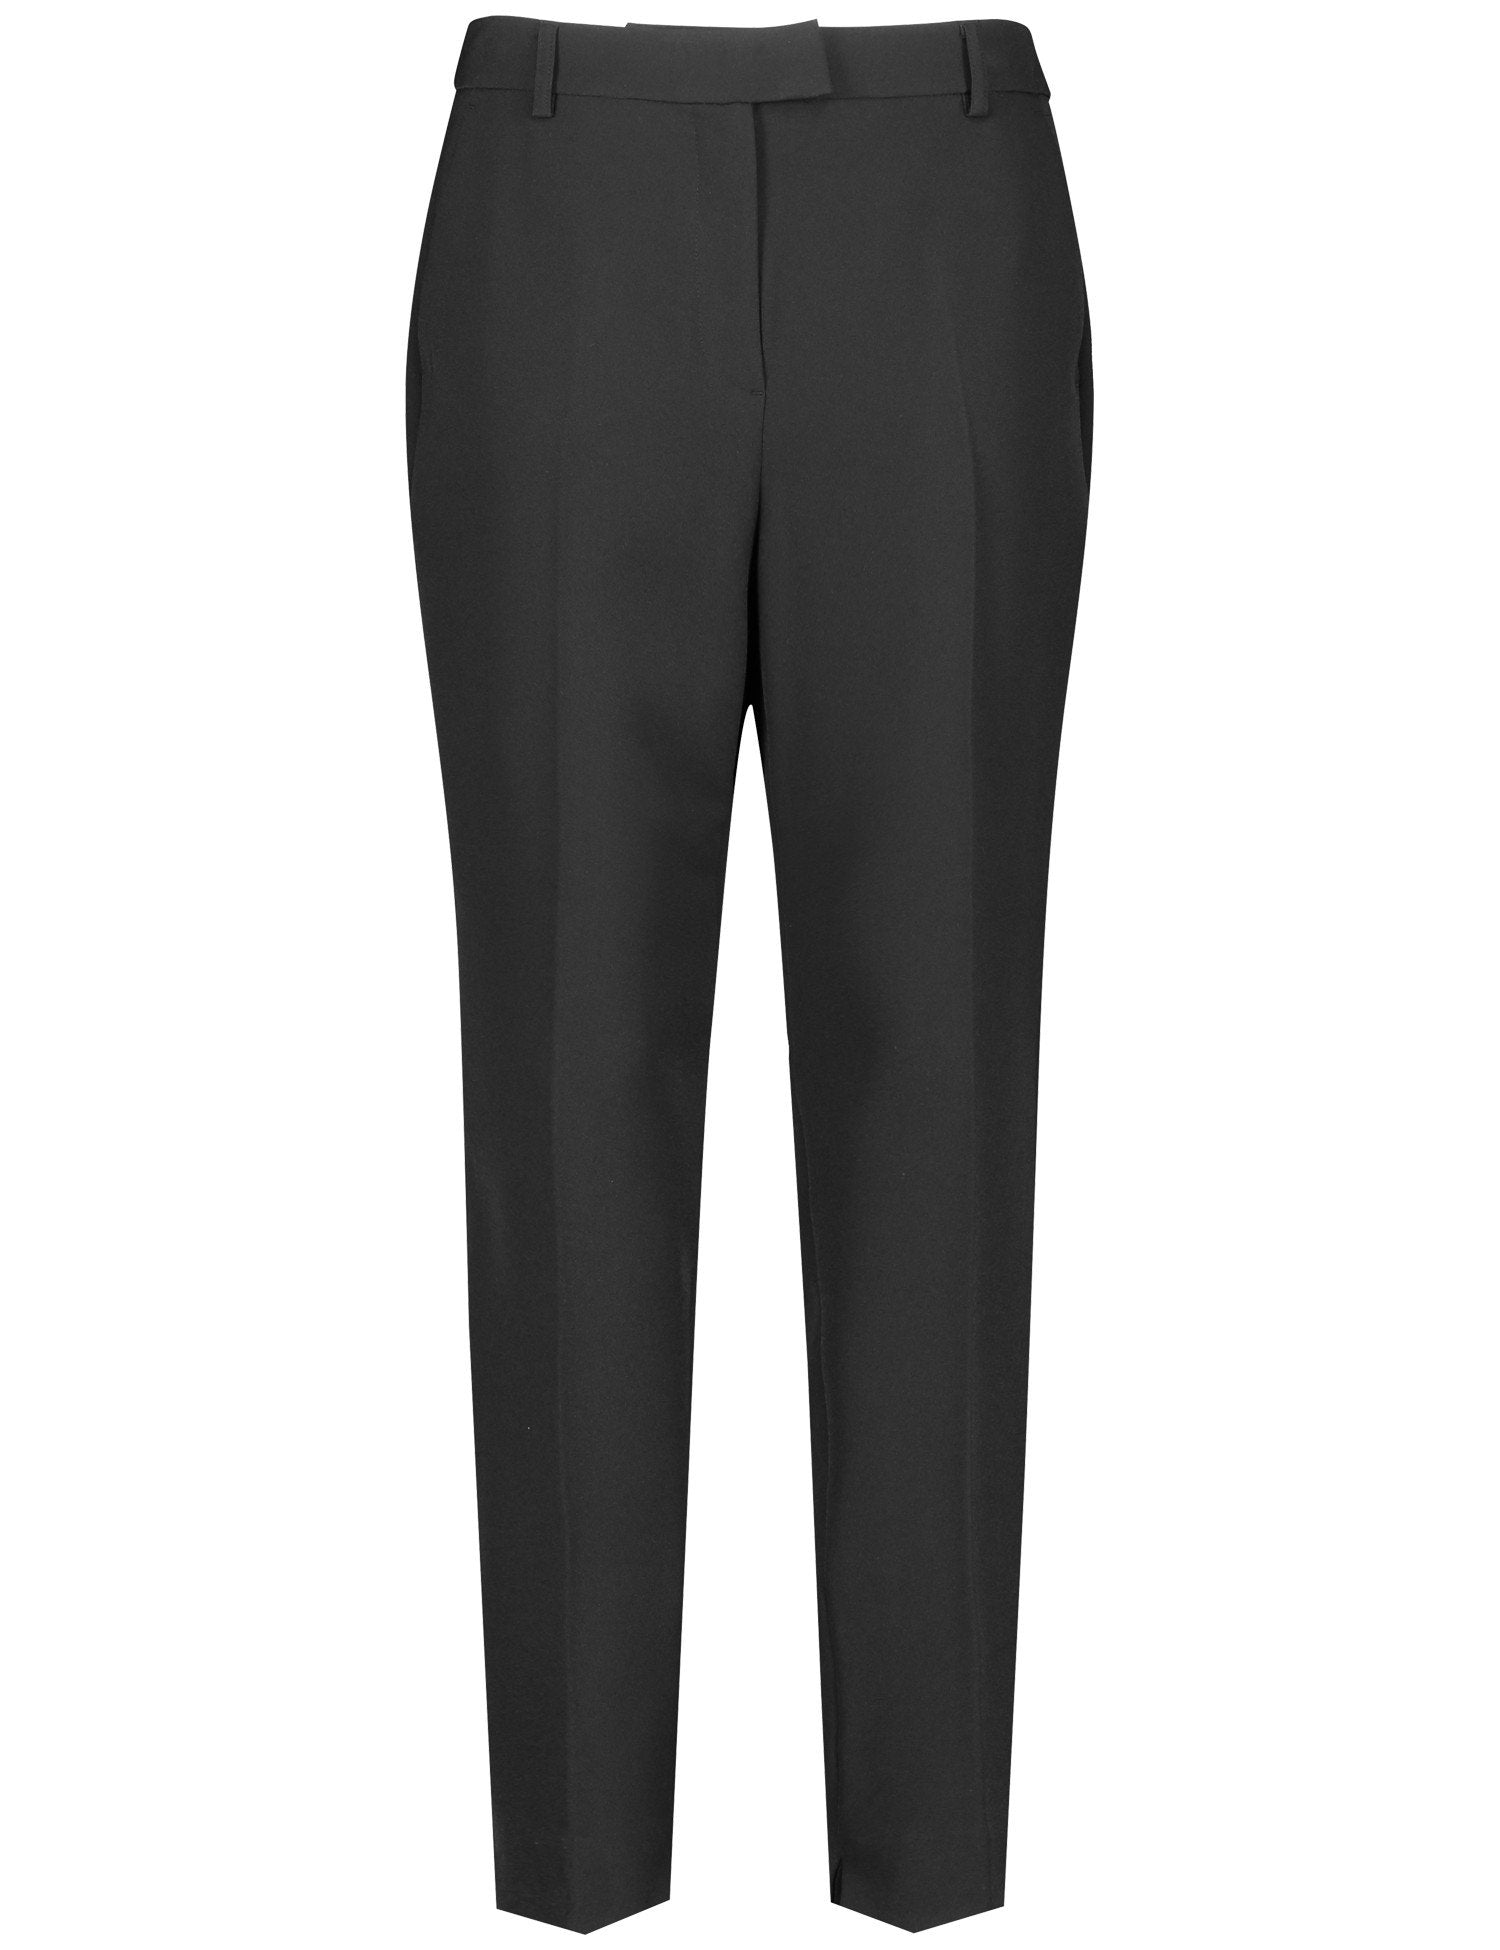 7/8-Length Pressed Pleat Trousers In A Slim Fit_920973-19899_1100_07